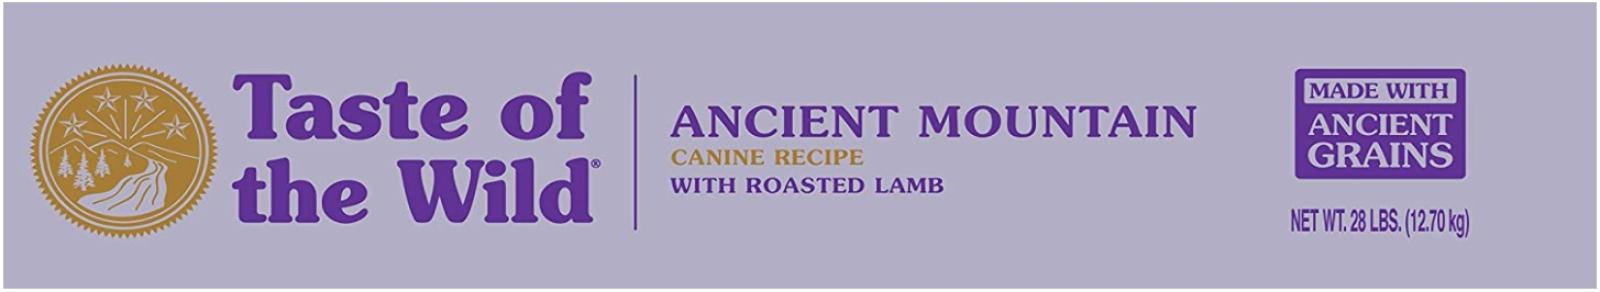 Taste of the Wild Ancient Mountain with Roasted Lamb and Ancient Grains